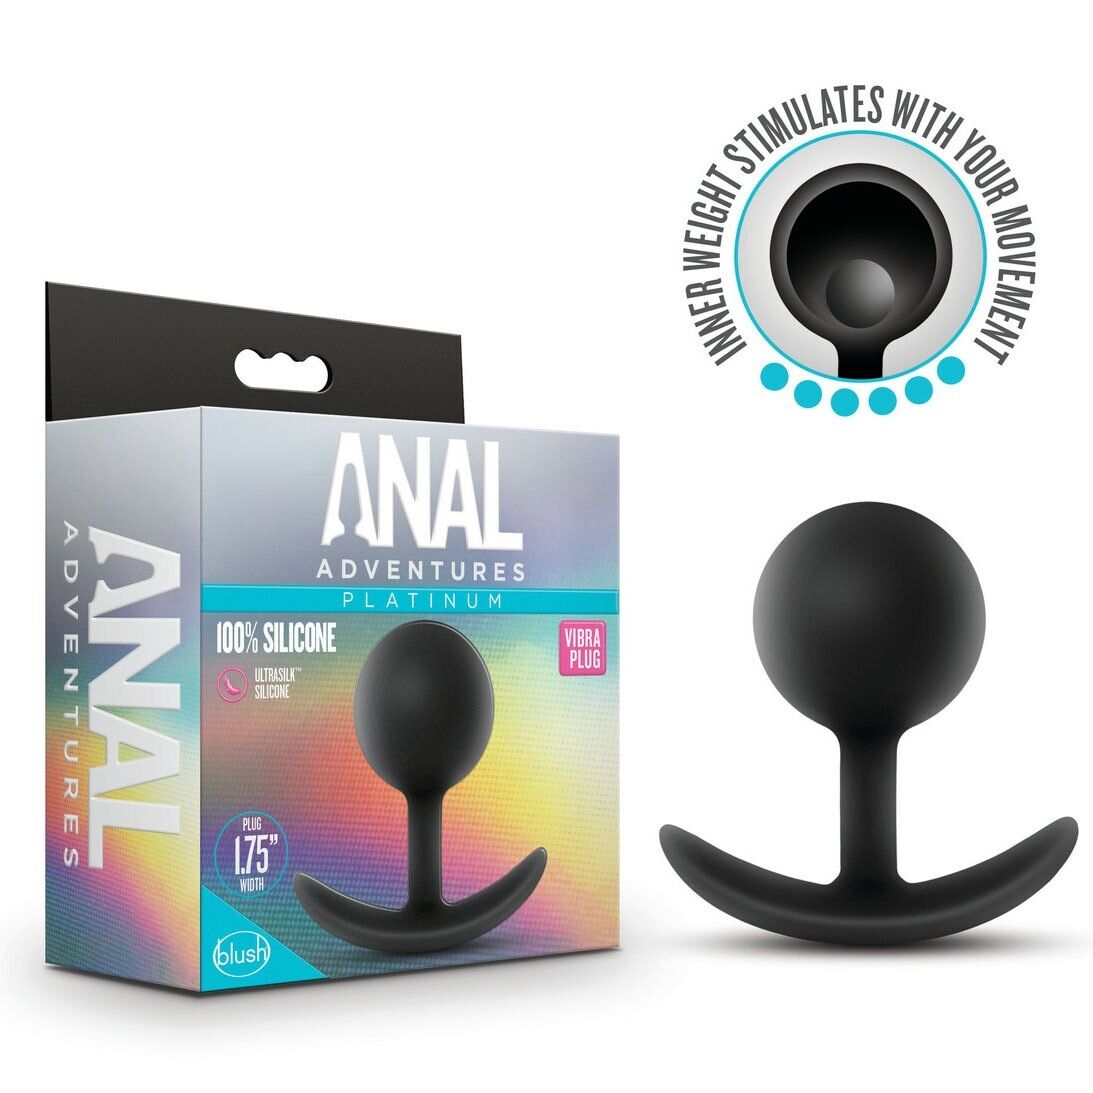 Silicone Wearable Vibrating Anal Beads Butt Plug Sex Toys for Men Women Couples